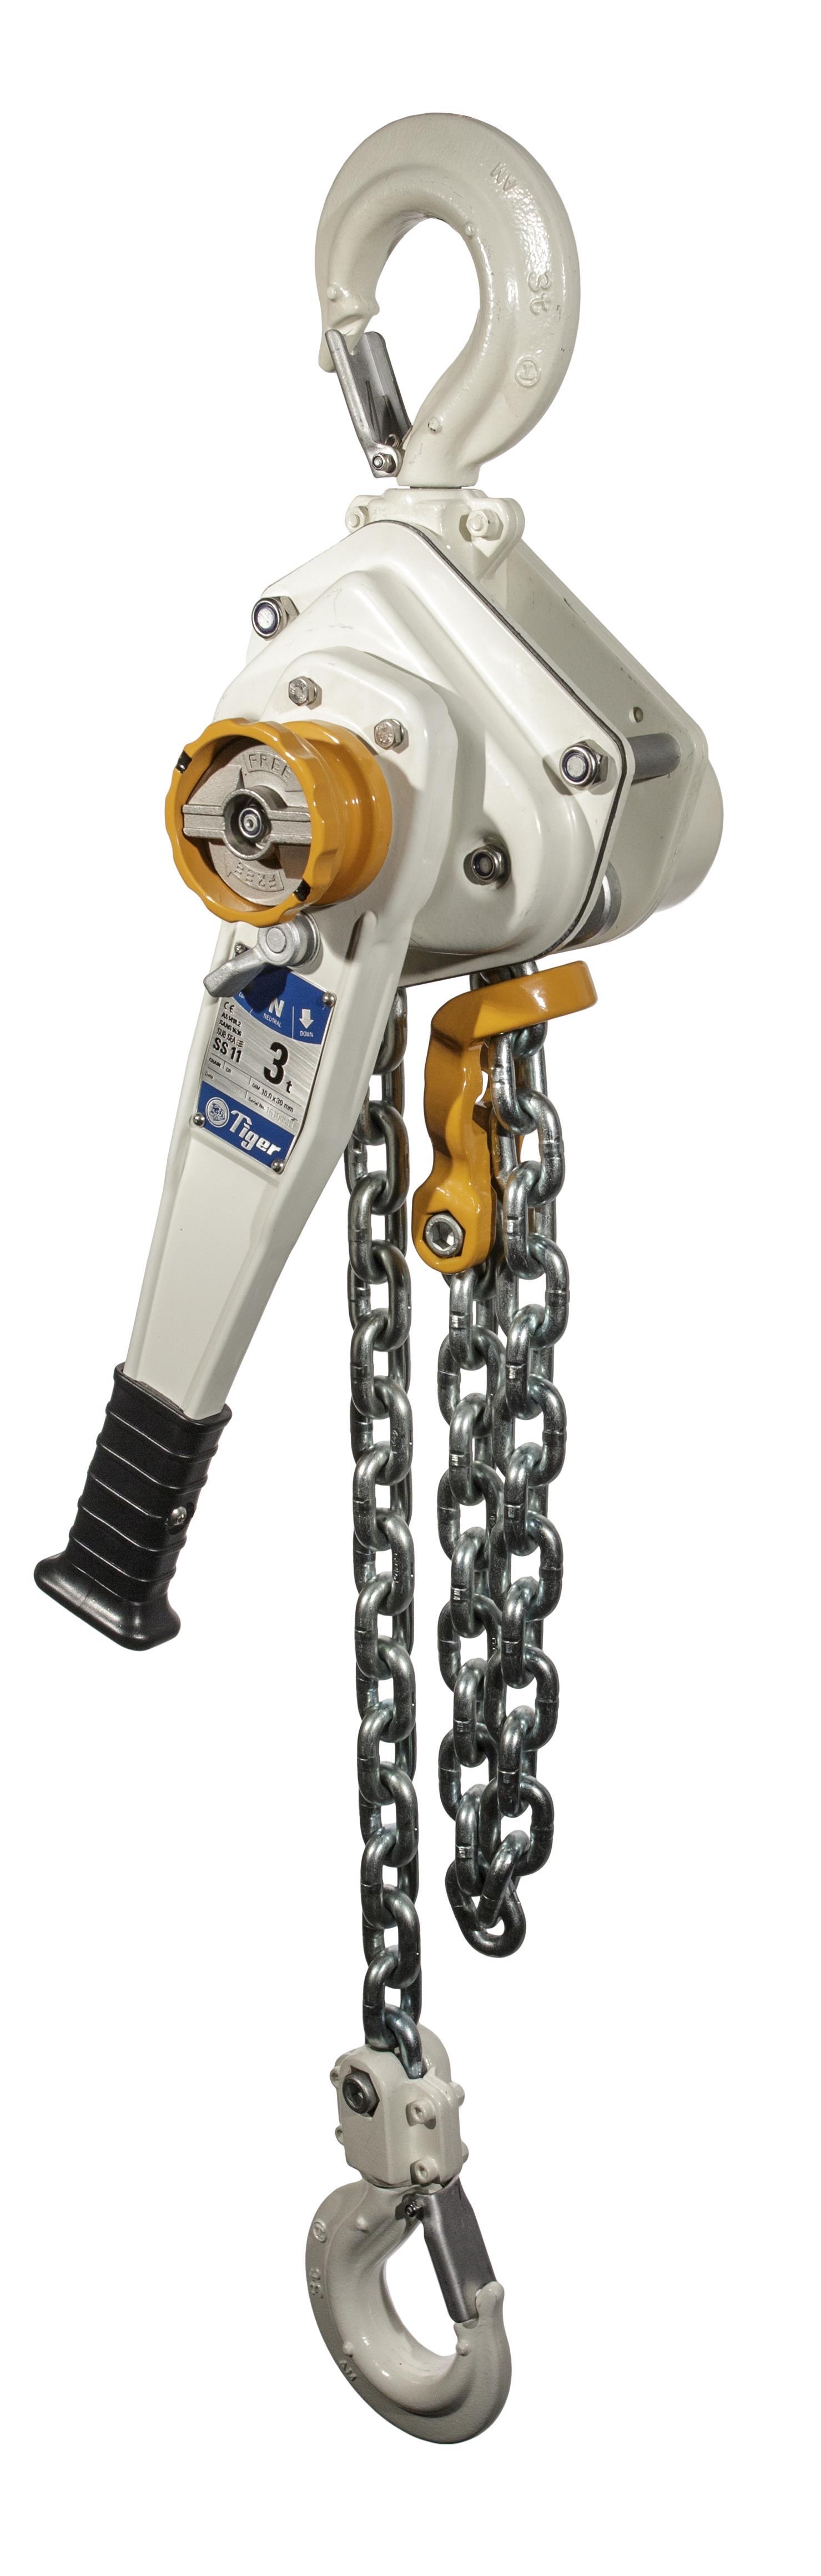 Hoistshop – Tiger Subsea Lever Hoist Type SS11 – 0.8T Capacity With Load Limiter – 210-45 – 4.0m – Stainless Steel – White / Silver / Yellow